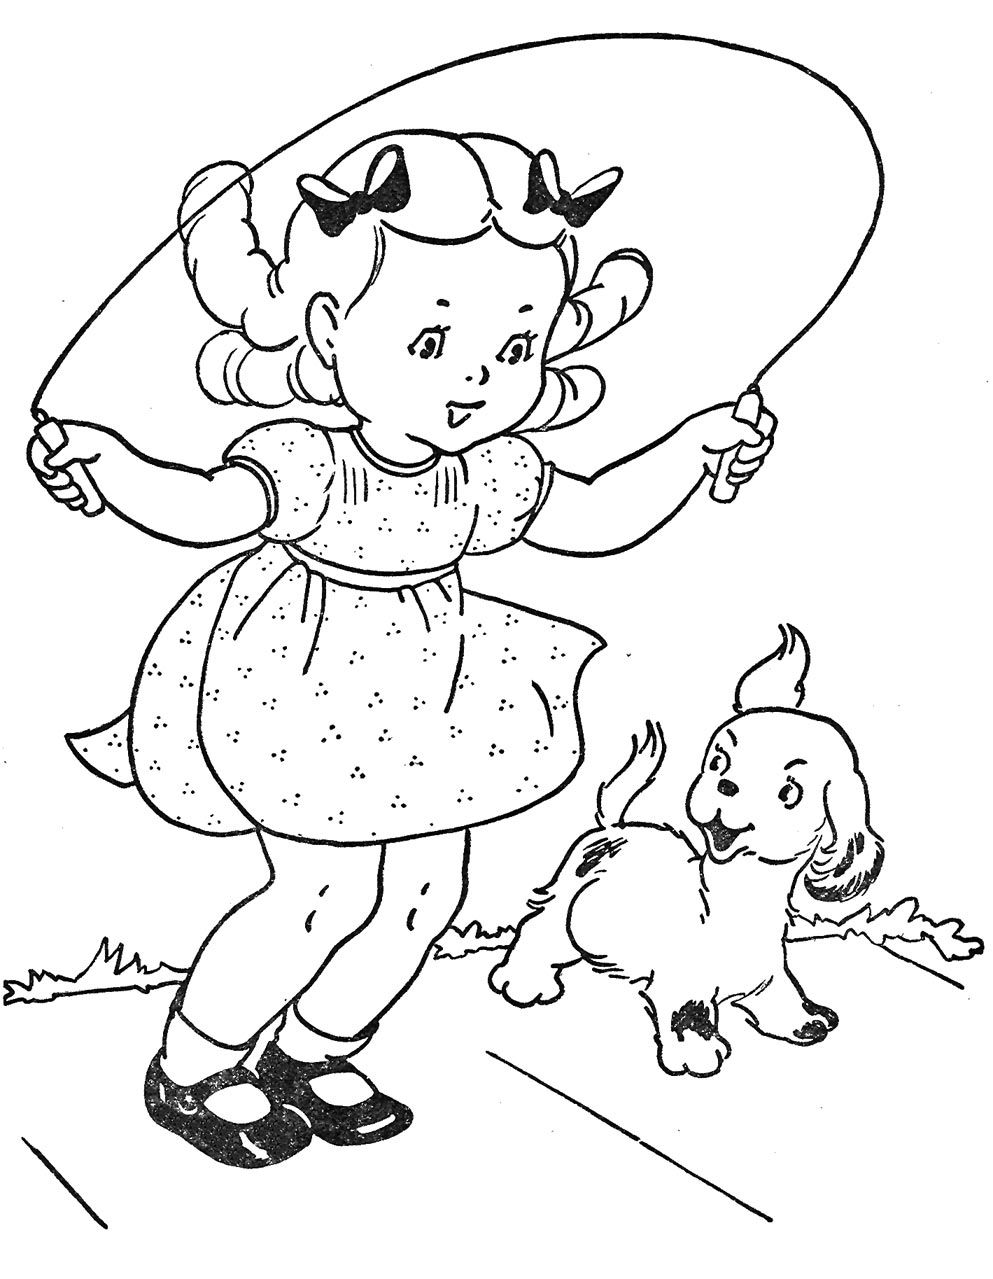 9 Pics of Girls Jumping Coloring Pages - Girls Jumping Rope ...